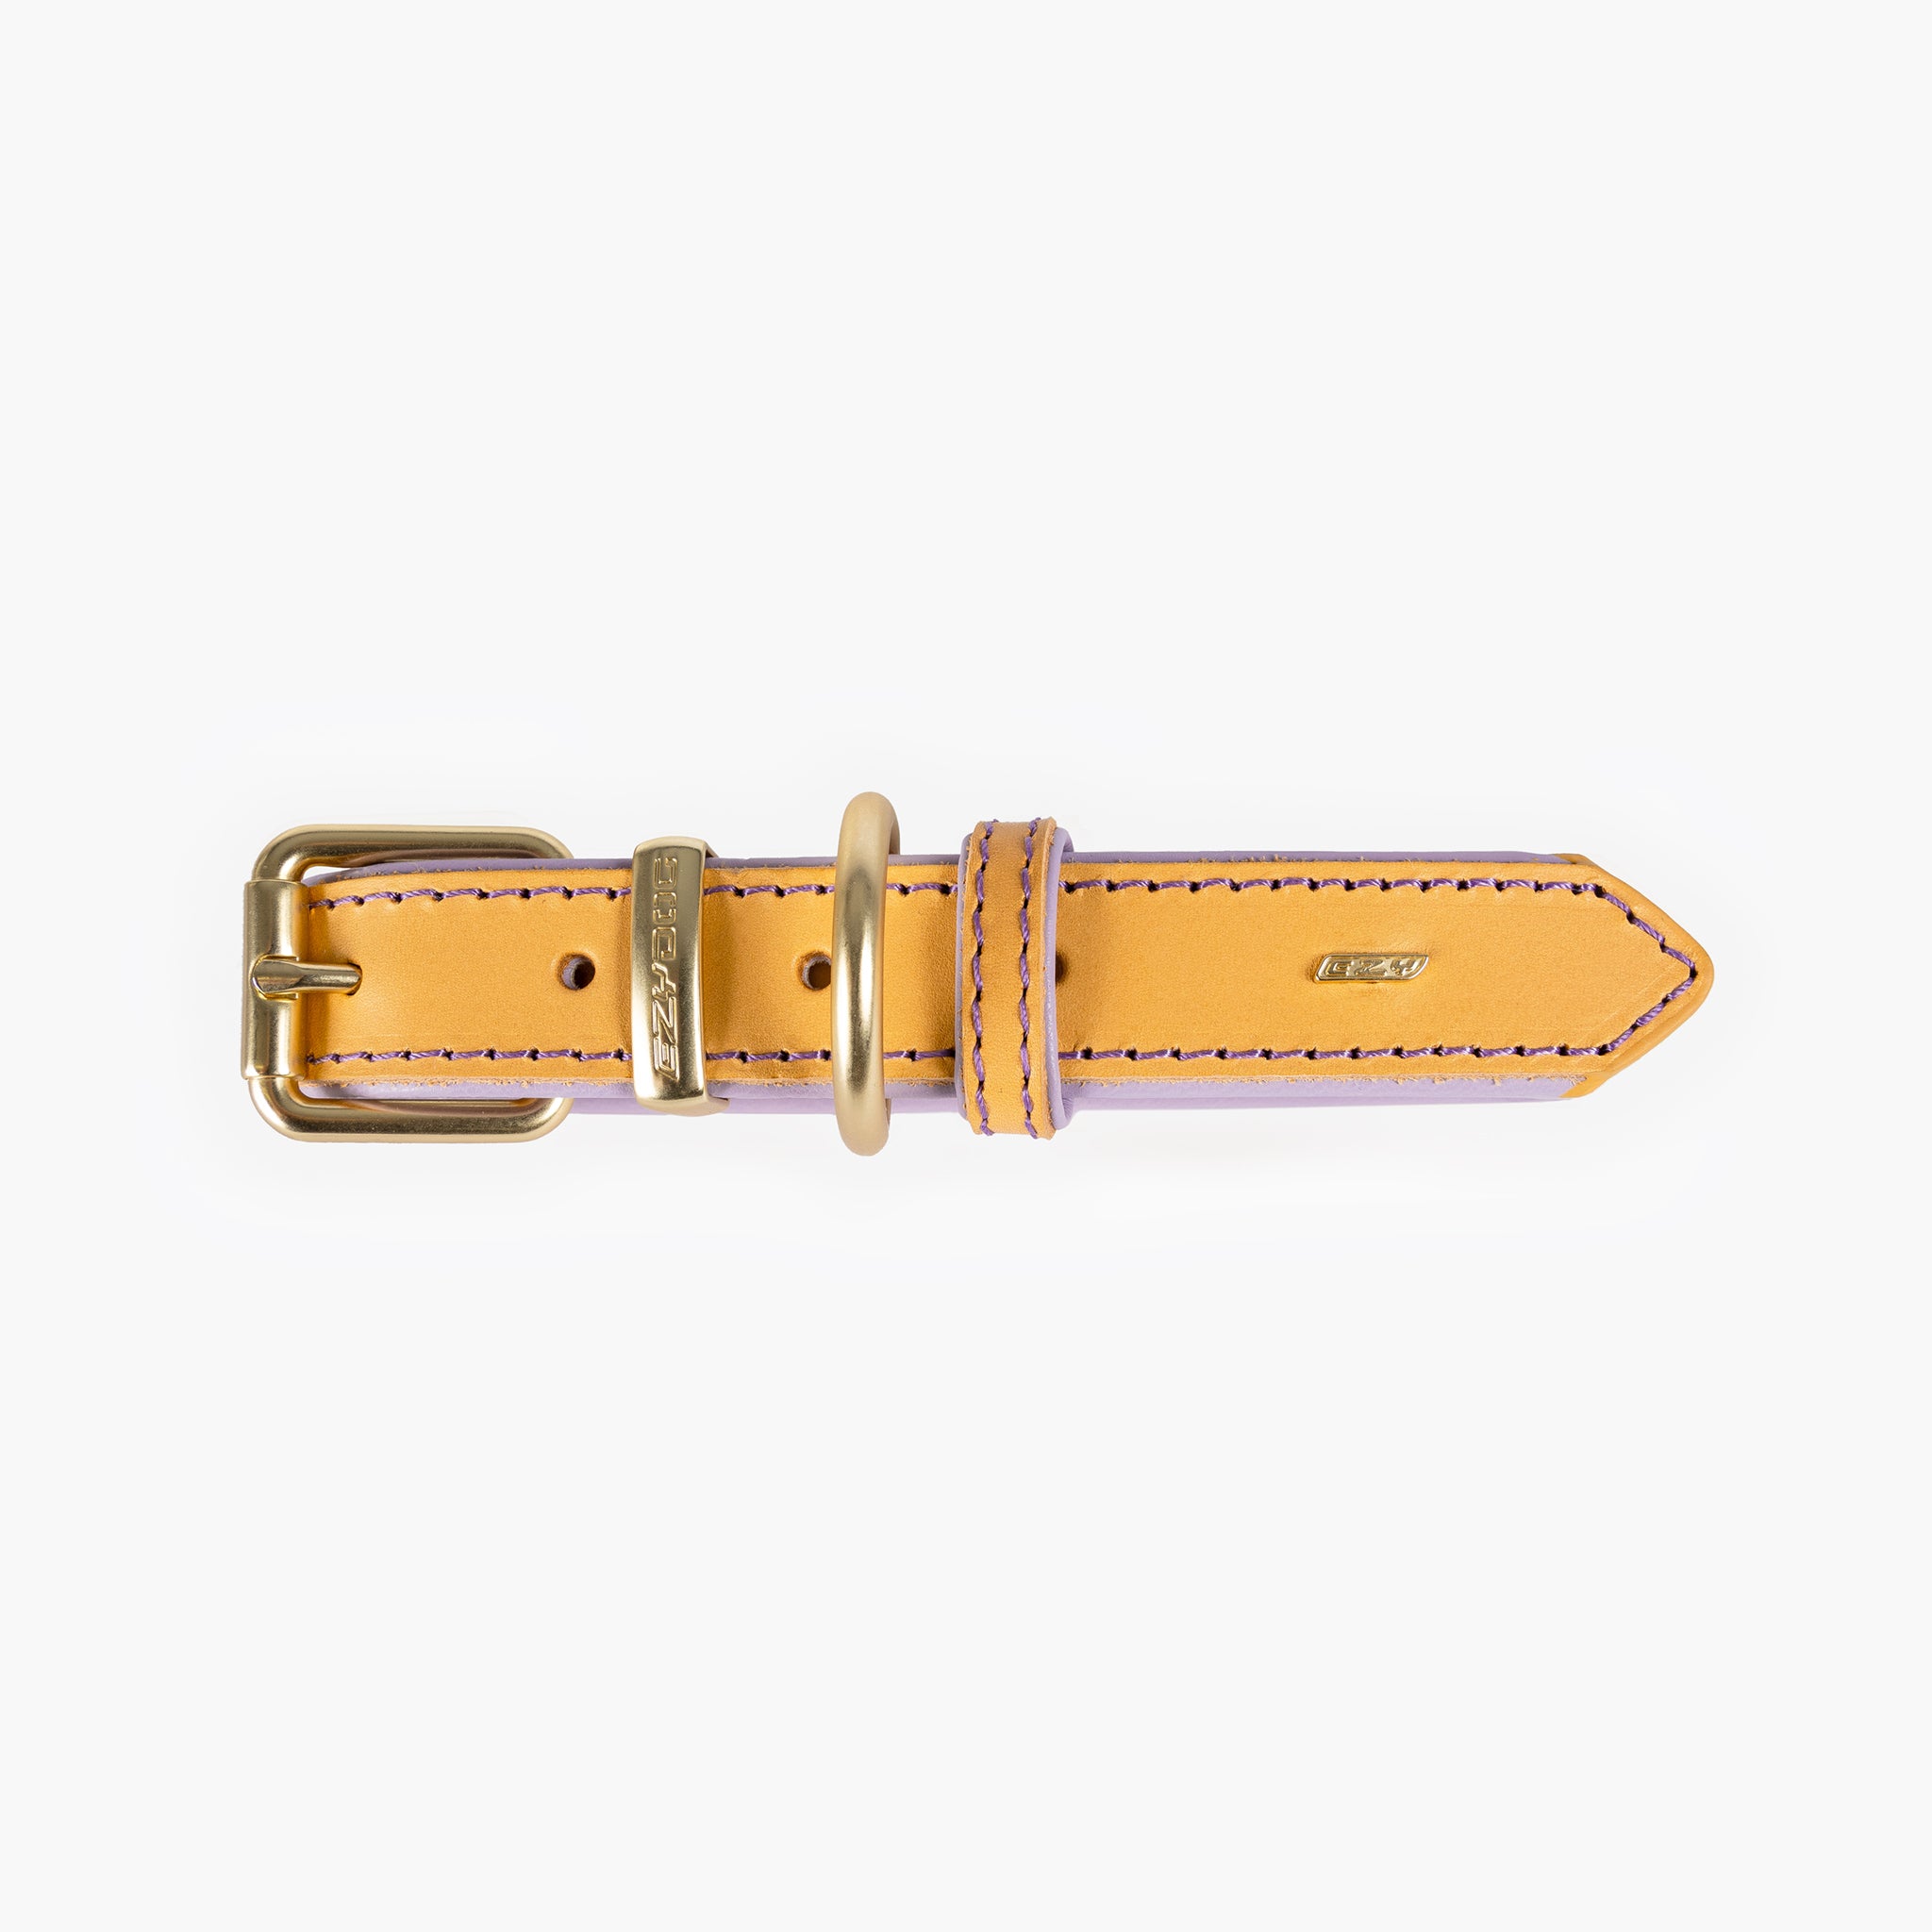 Oxford Leather - Classic Dog Collar